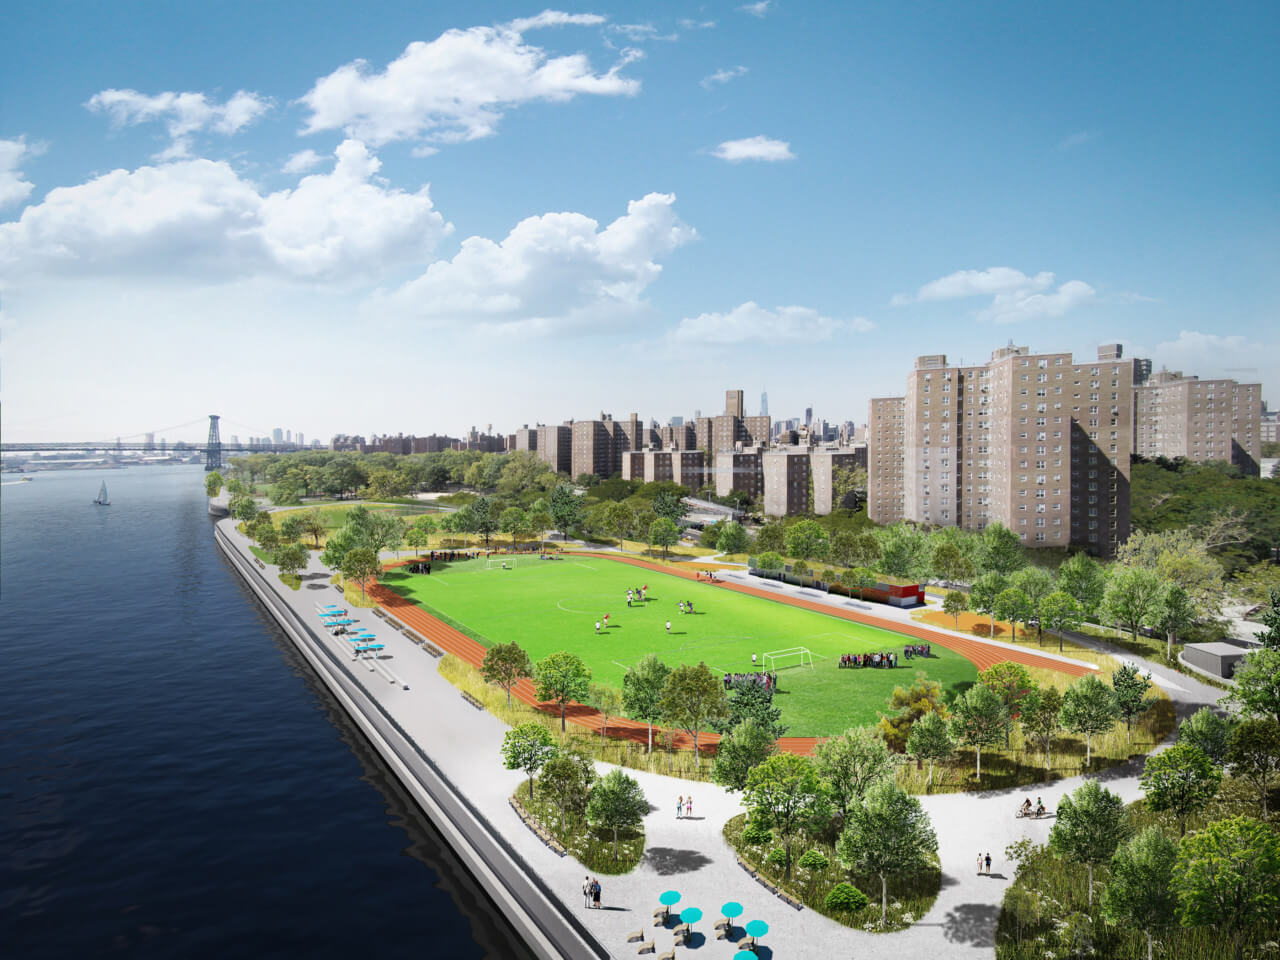 New waterfront park plazas as part of the East Side Coastal Resiliency Project